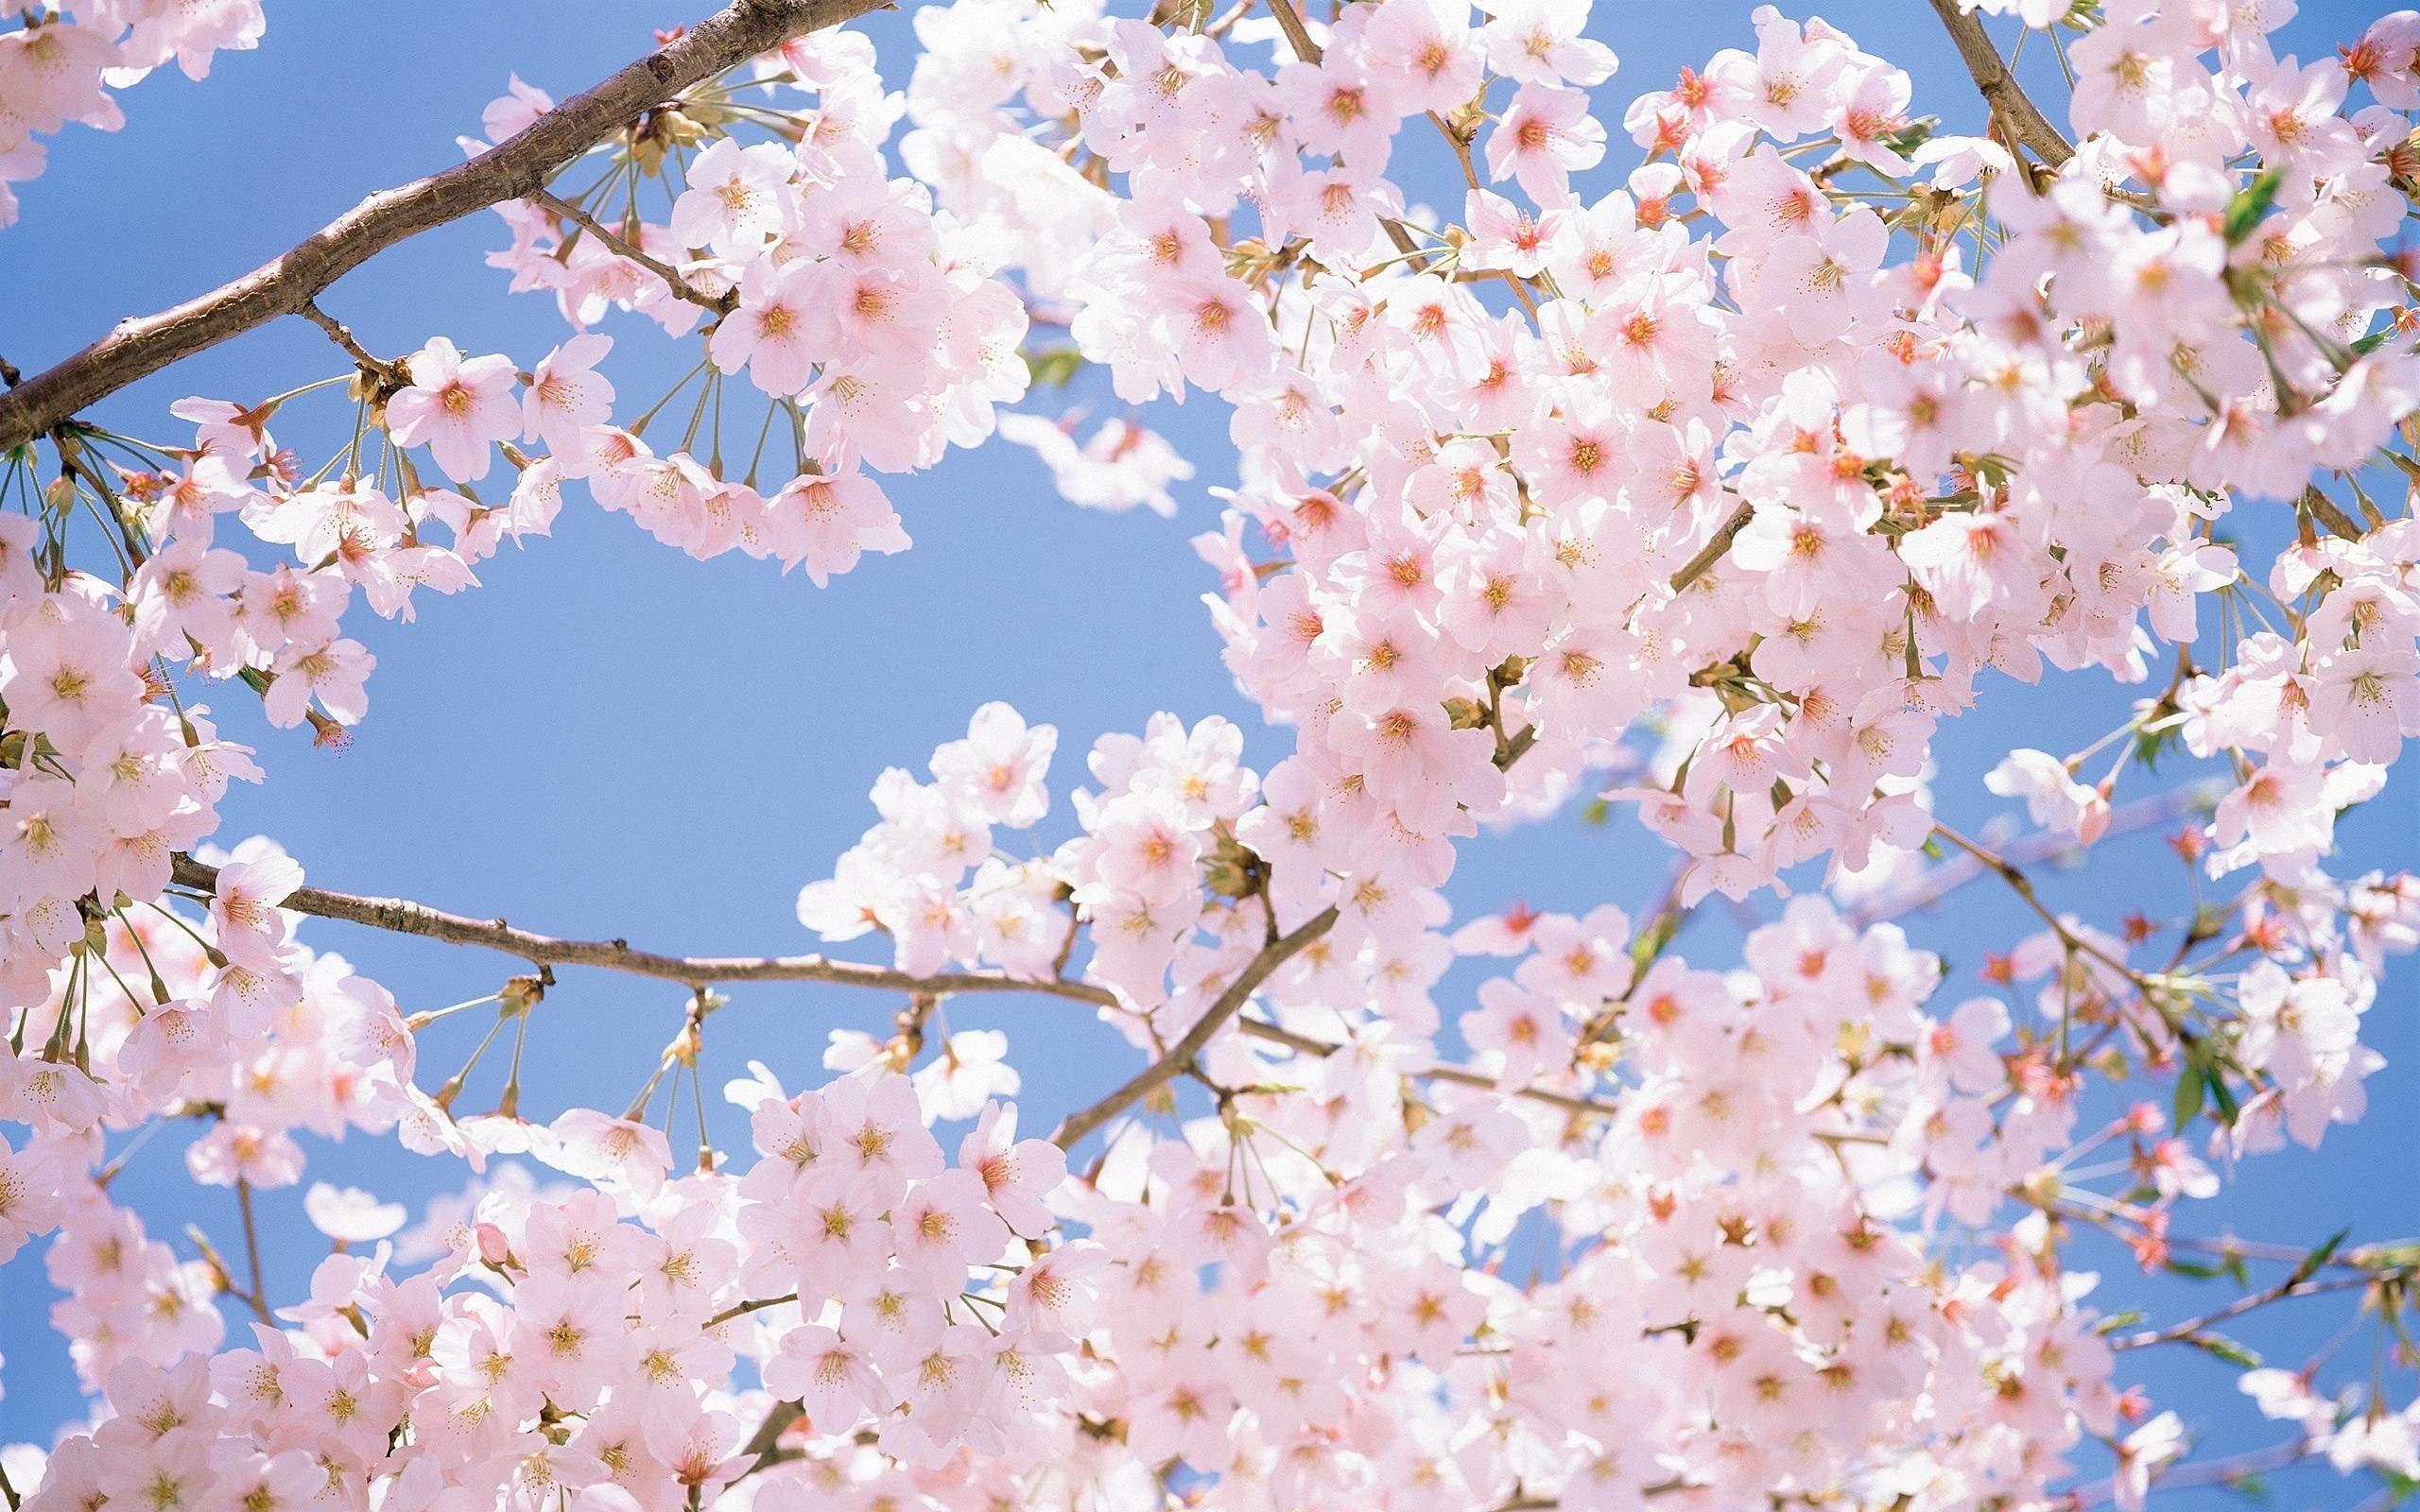 Japanese Cherry Blossom Wallpapers - Top Free Japanese Cherry Blossom